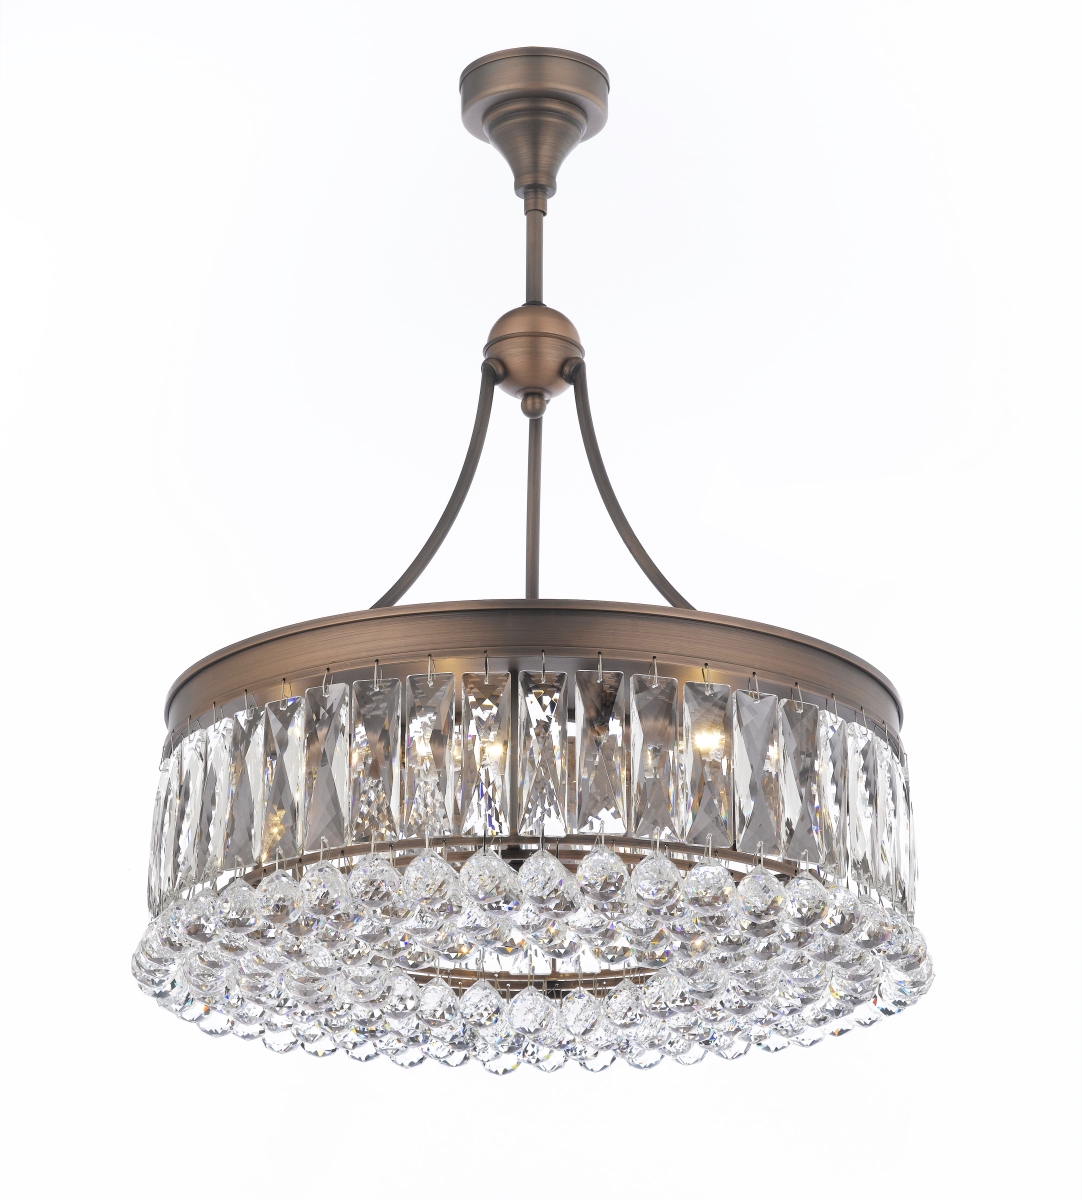 Pwg Lighting 2901-20-ac 20 In. Valencia Hanging Chandelier With Heirloom Grandcut Crystals - Antique Copper